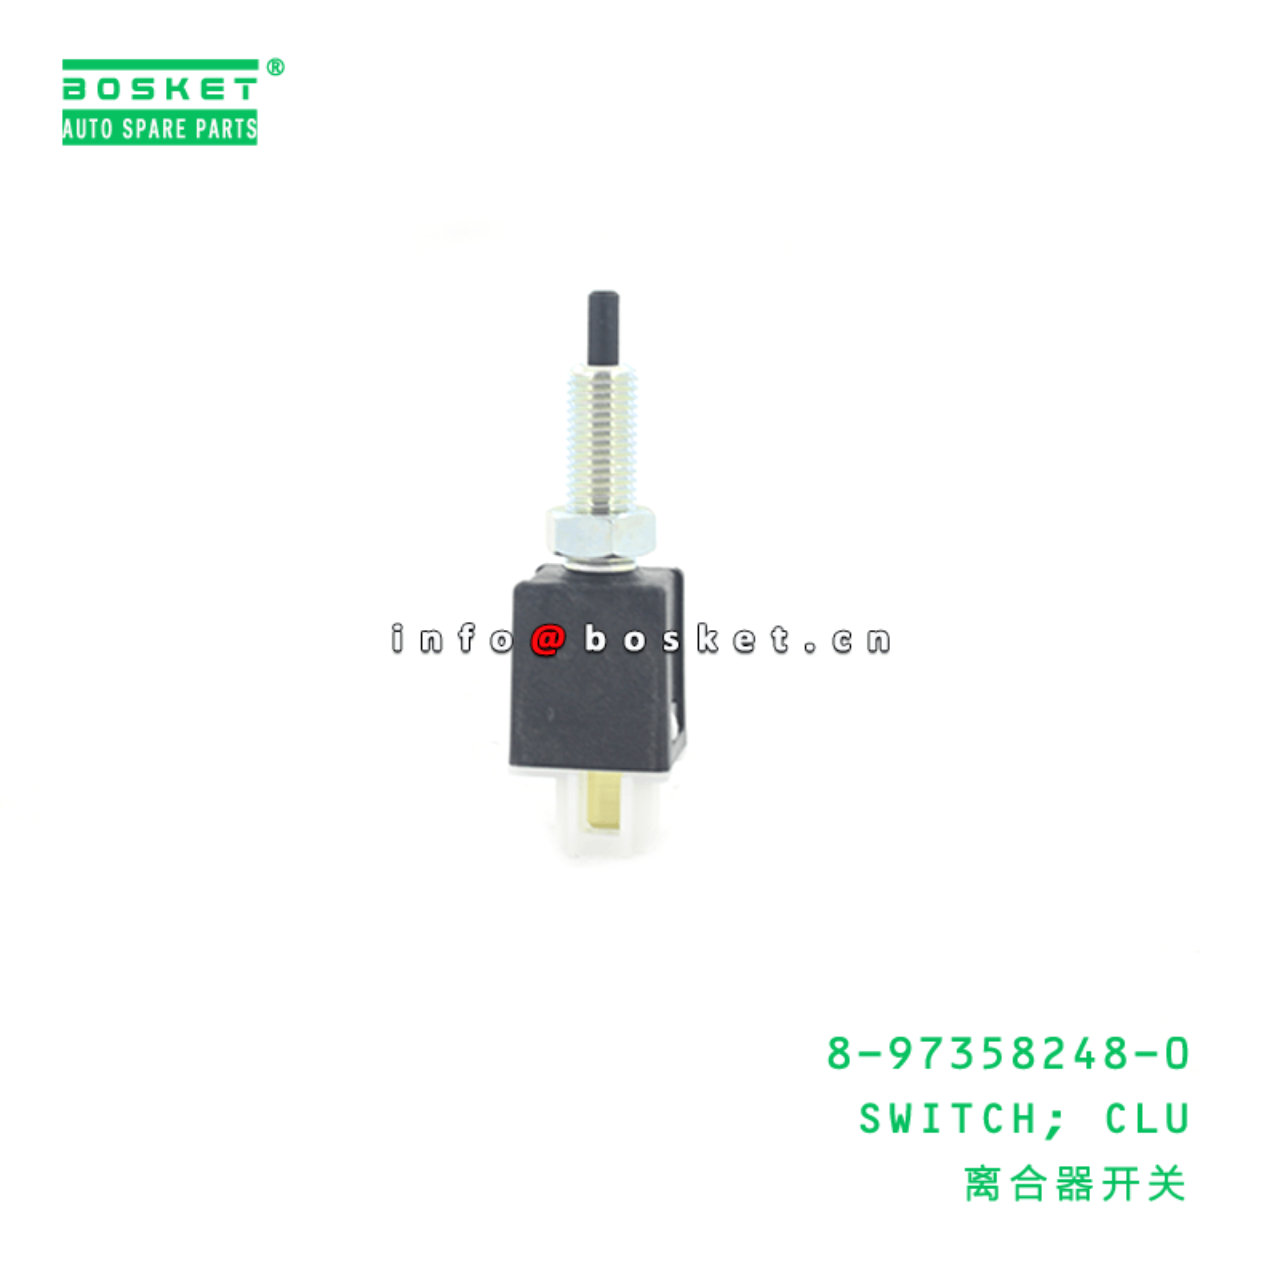 8-97358248-0 Clutch Switch 8973582480 Suitable for ISUZU NKR55 VC46 4JB1T